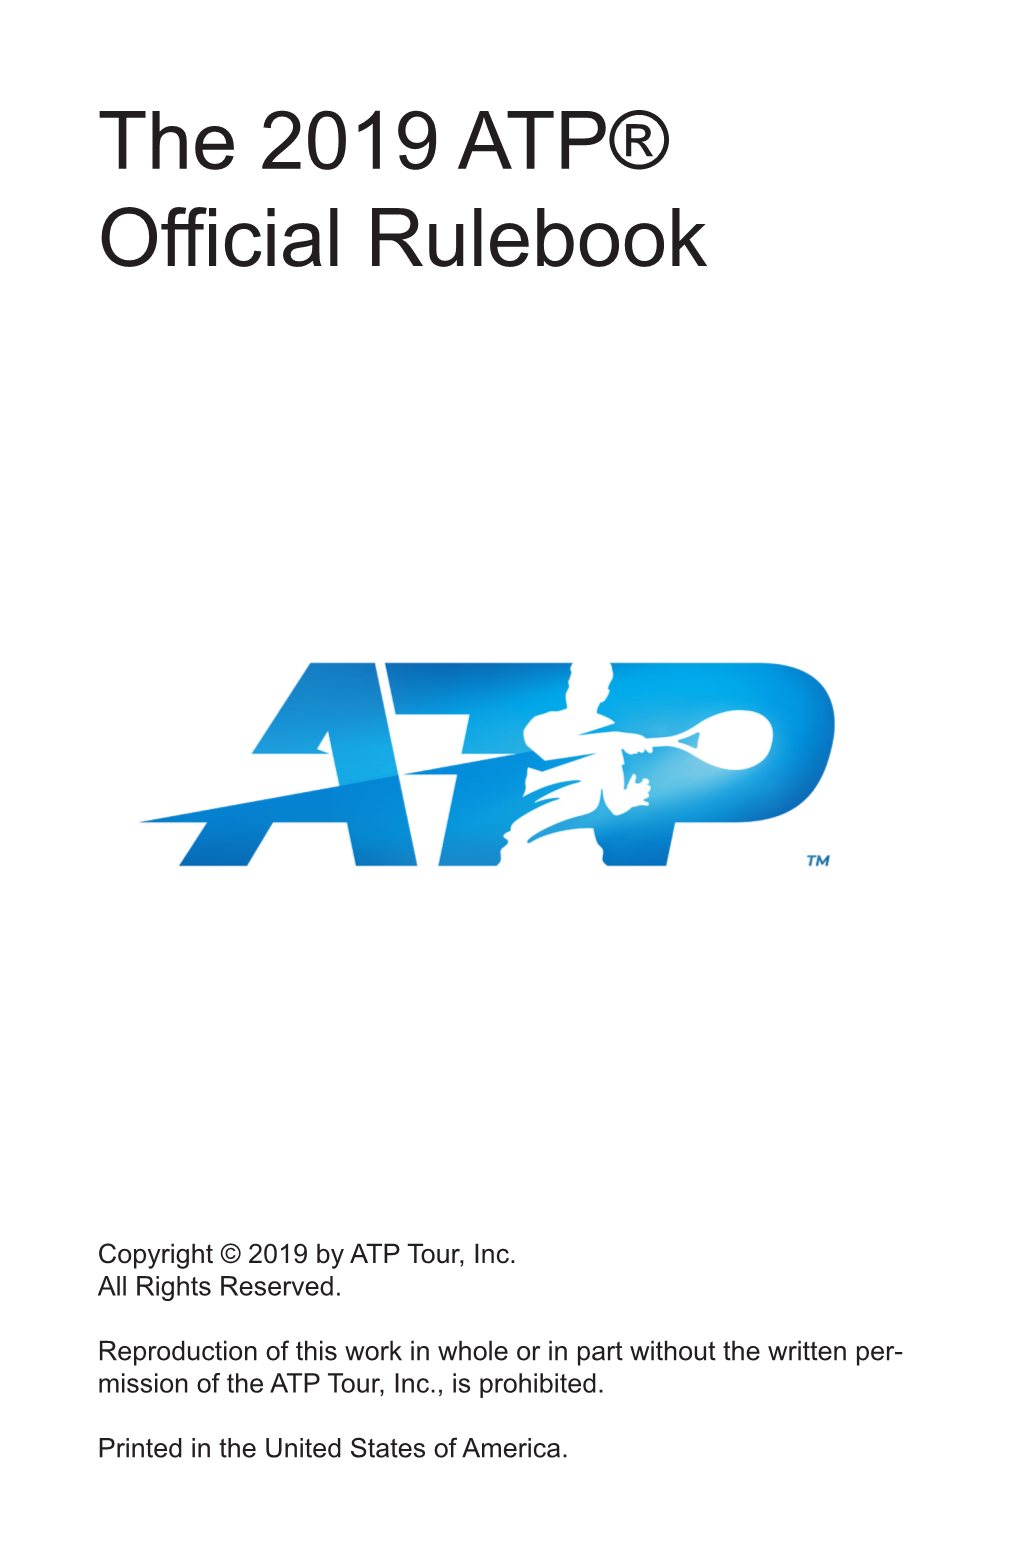 The 2019 ATP® Official Rulebook